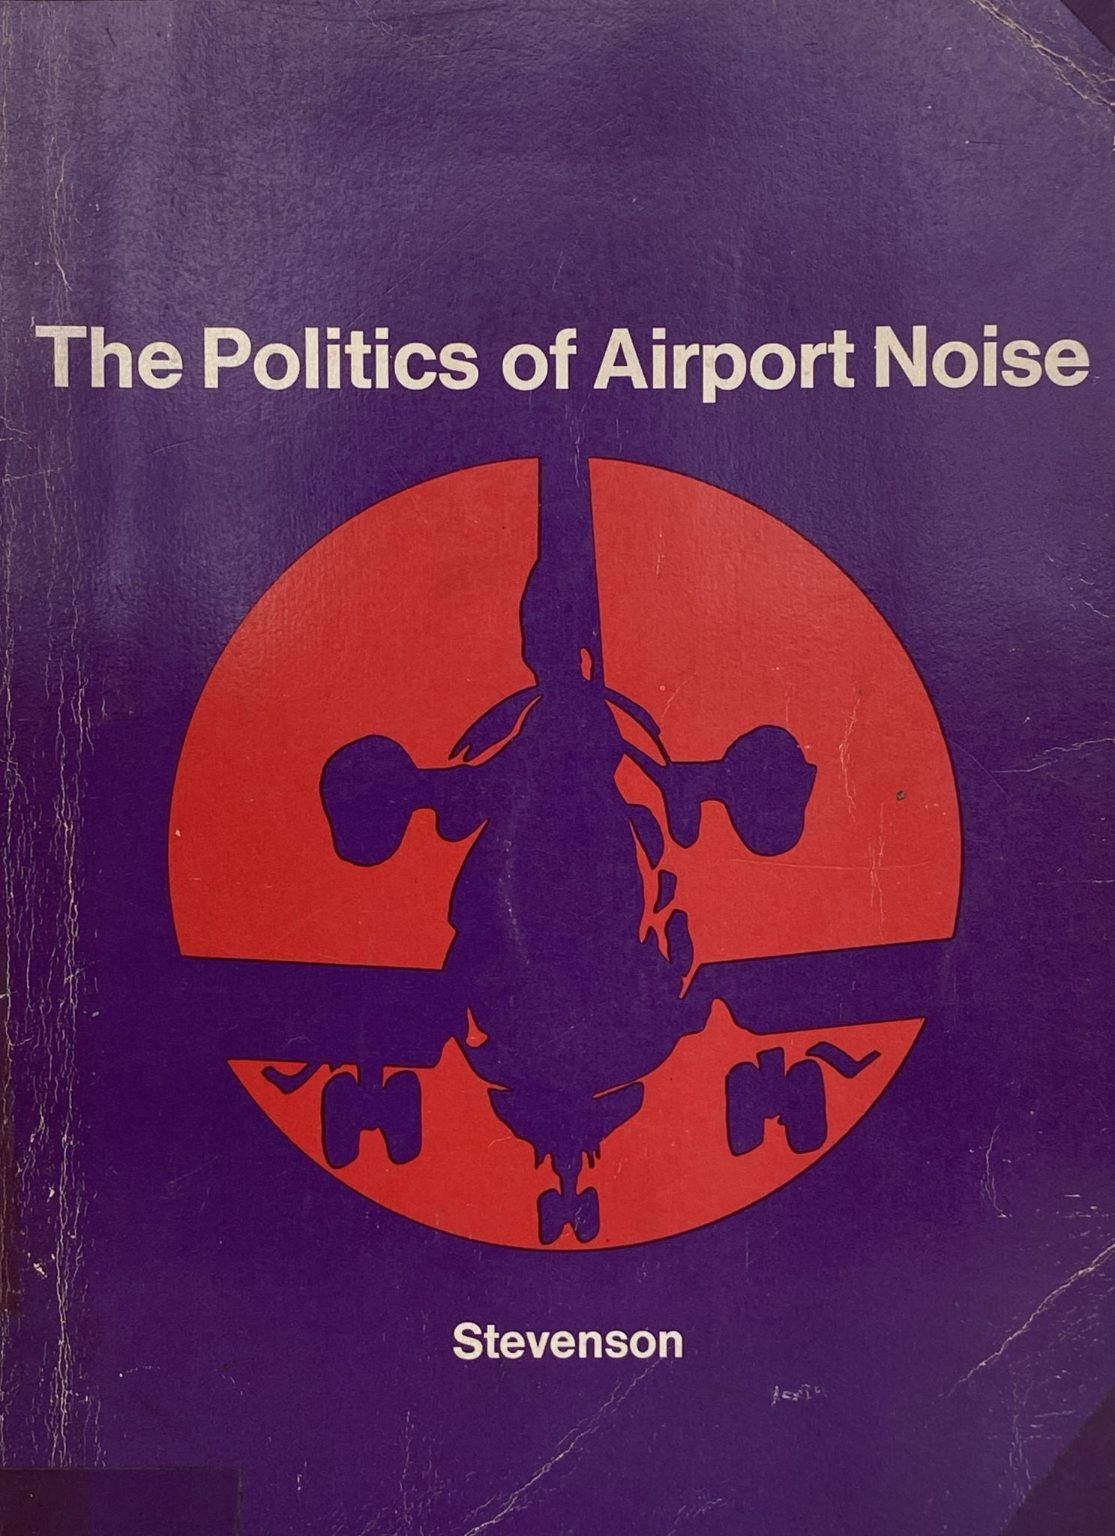 THE POLITICS OF AIRPORT NOISE